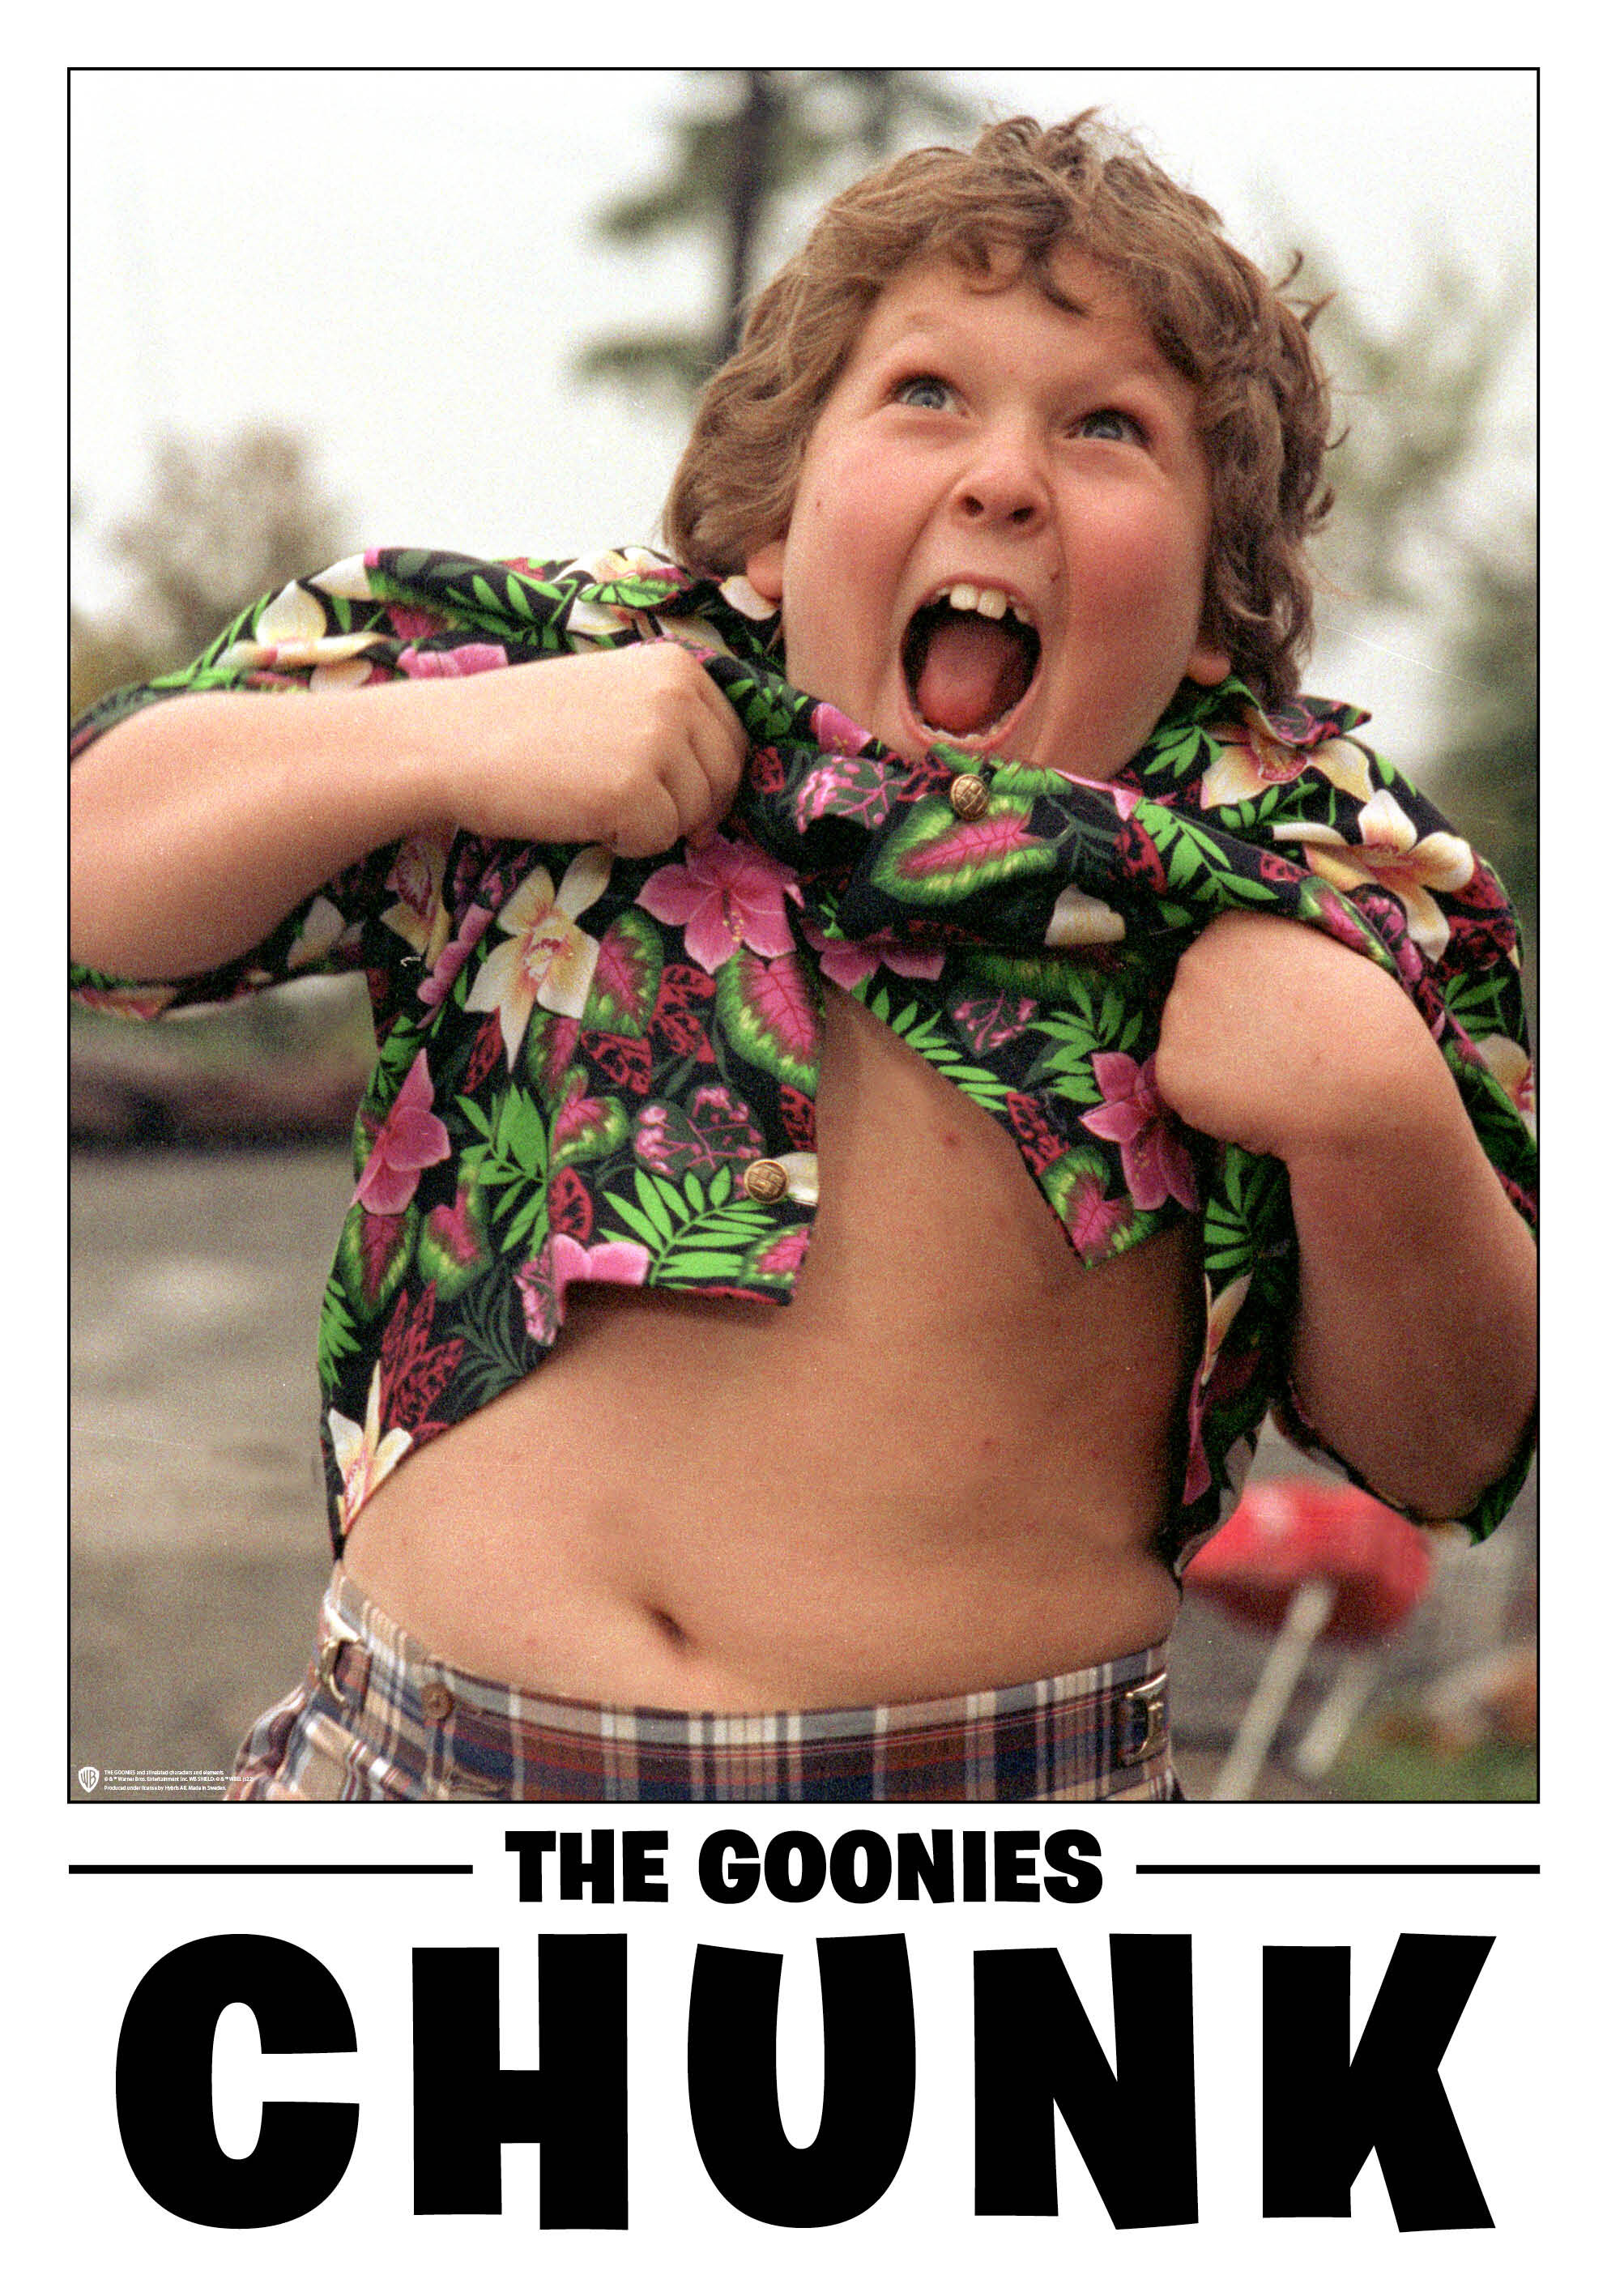 The Goonies - Chunk Poster